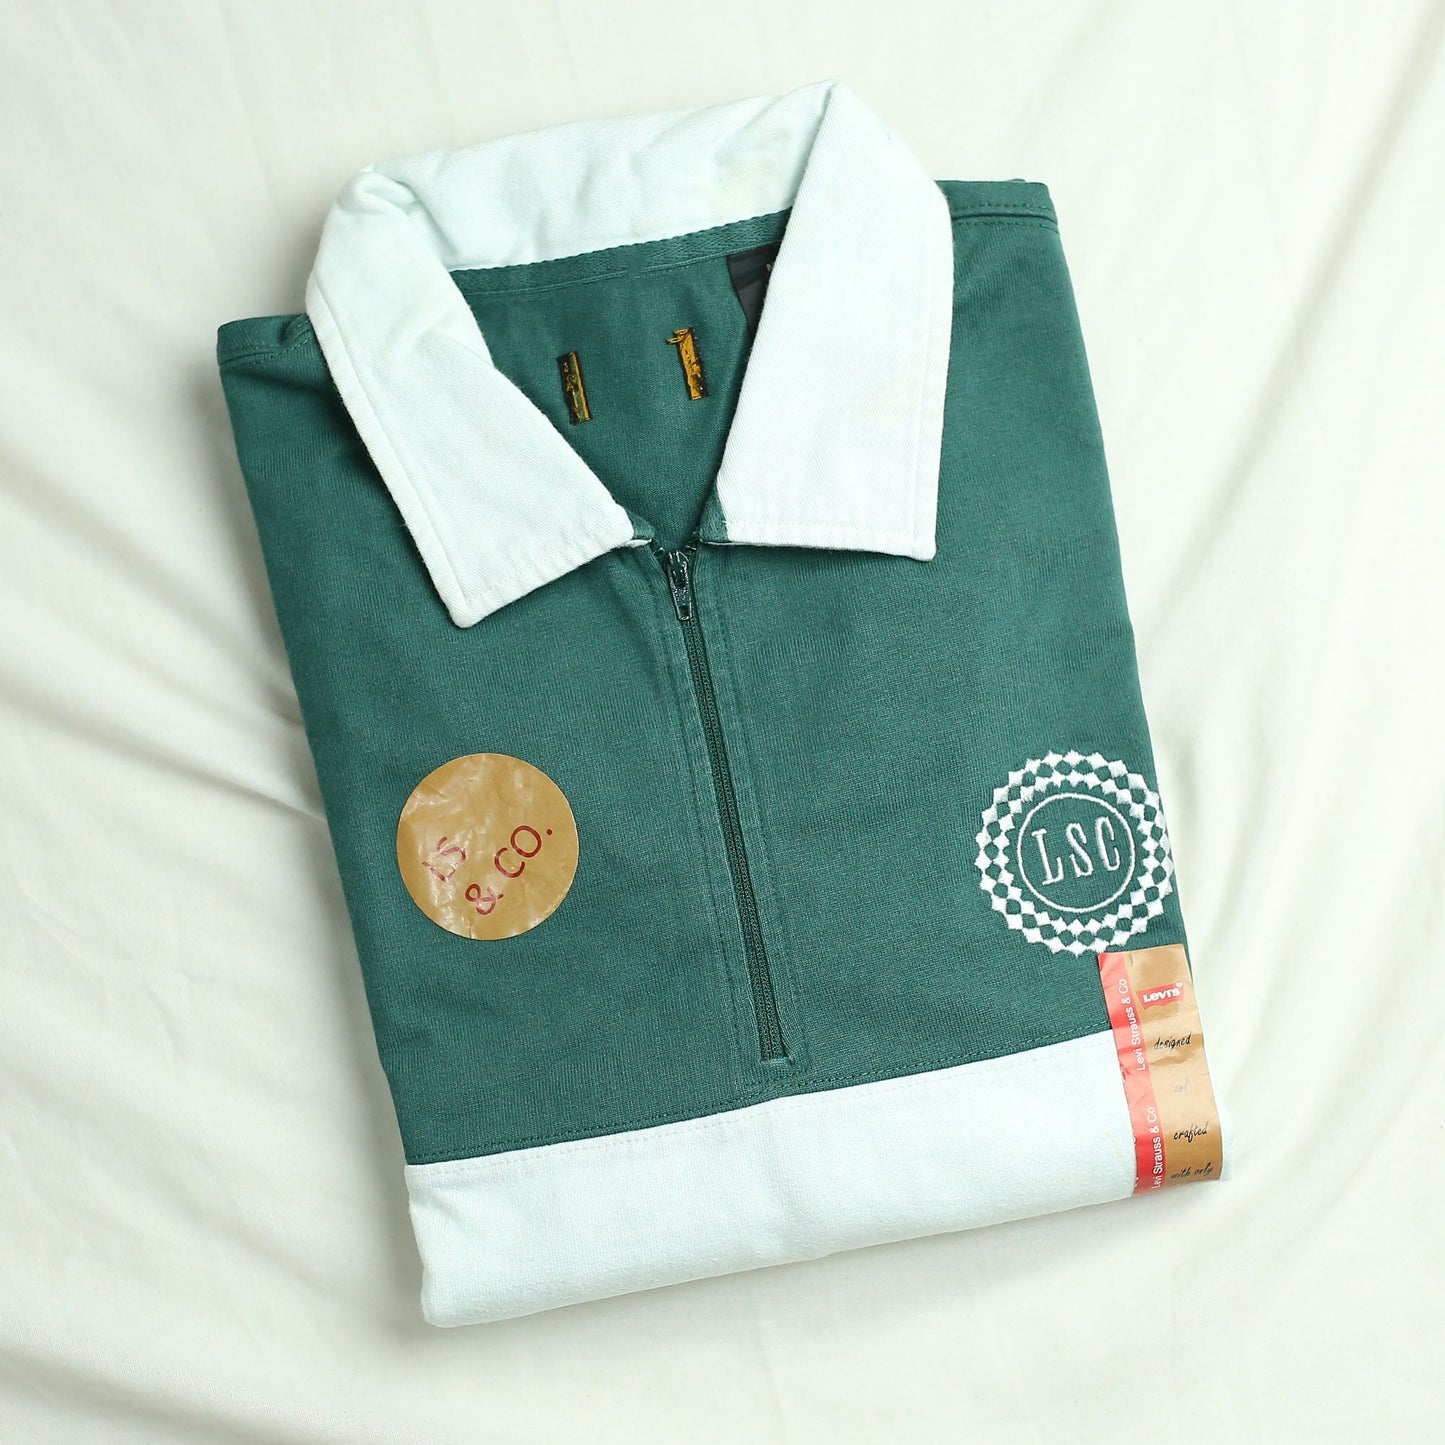 Lv&Sc -  Polo (Men) T Shirt - Green With White Thick Stripe With White Collar